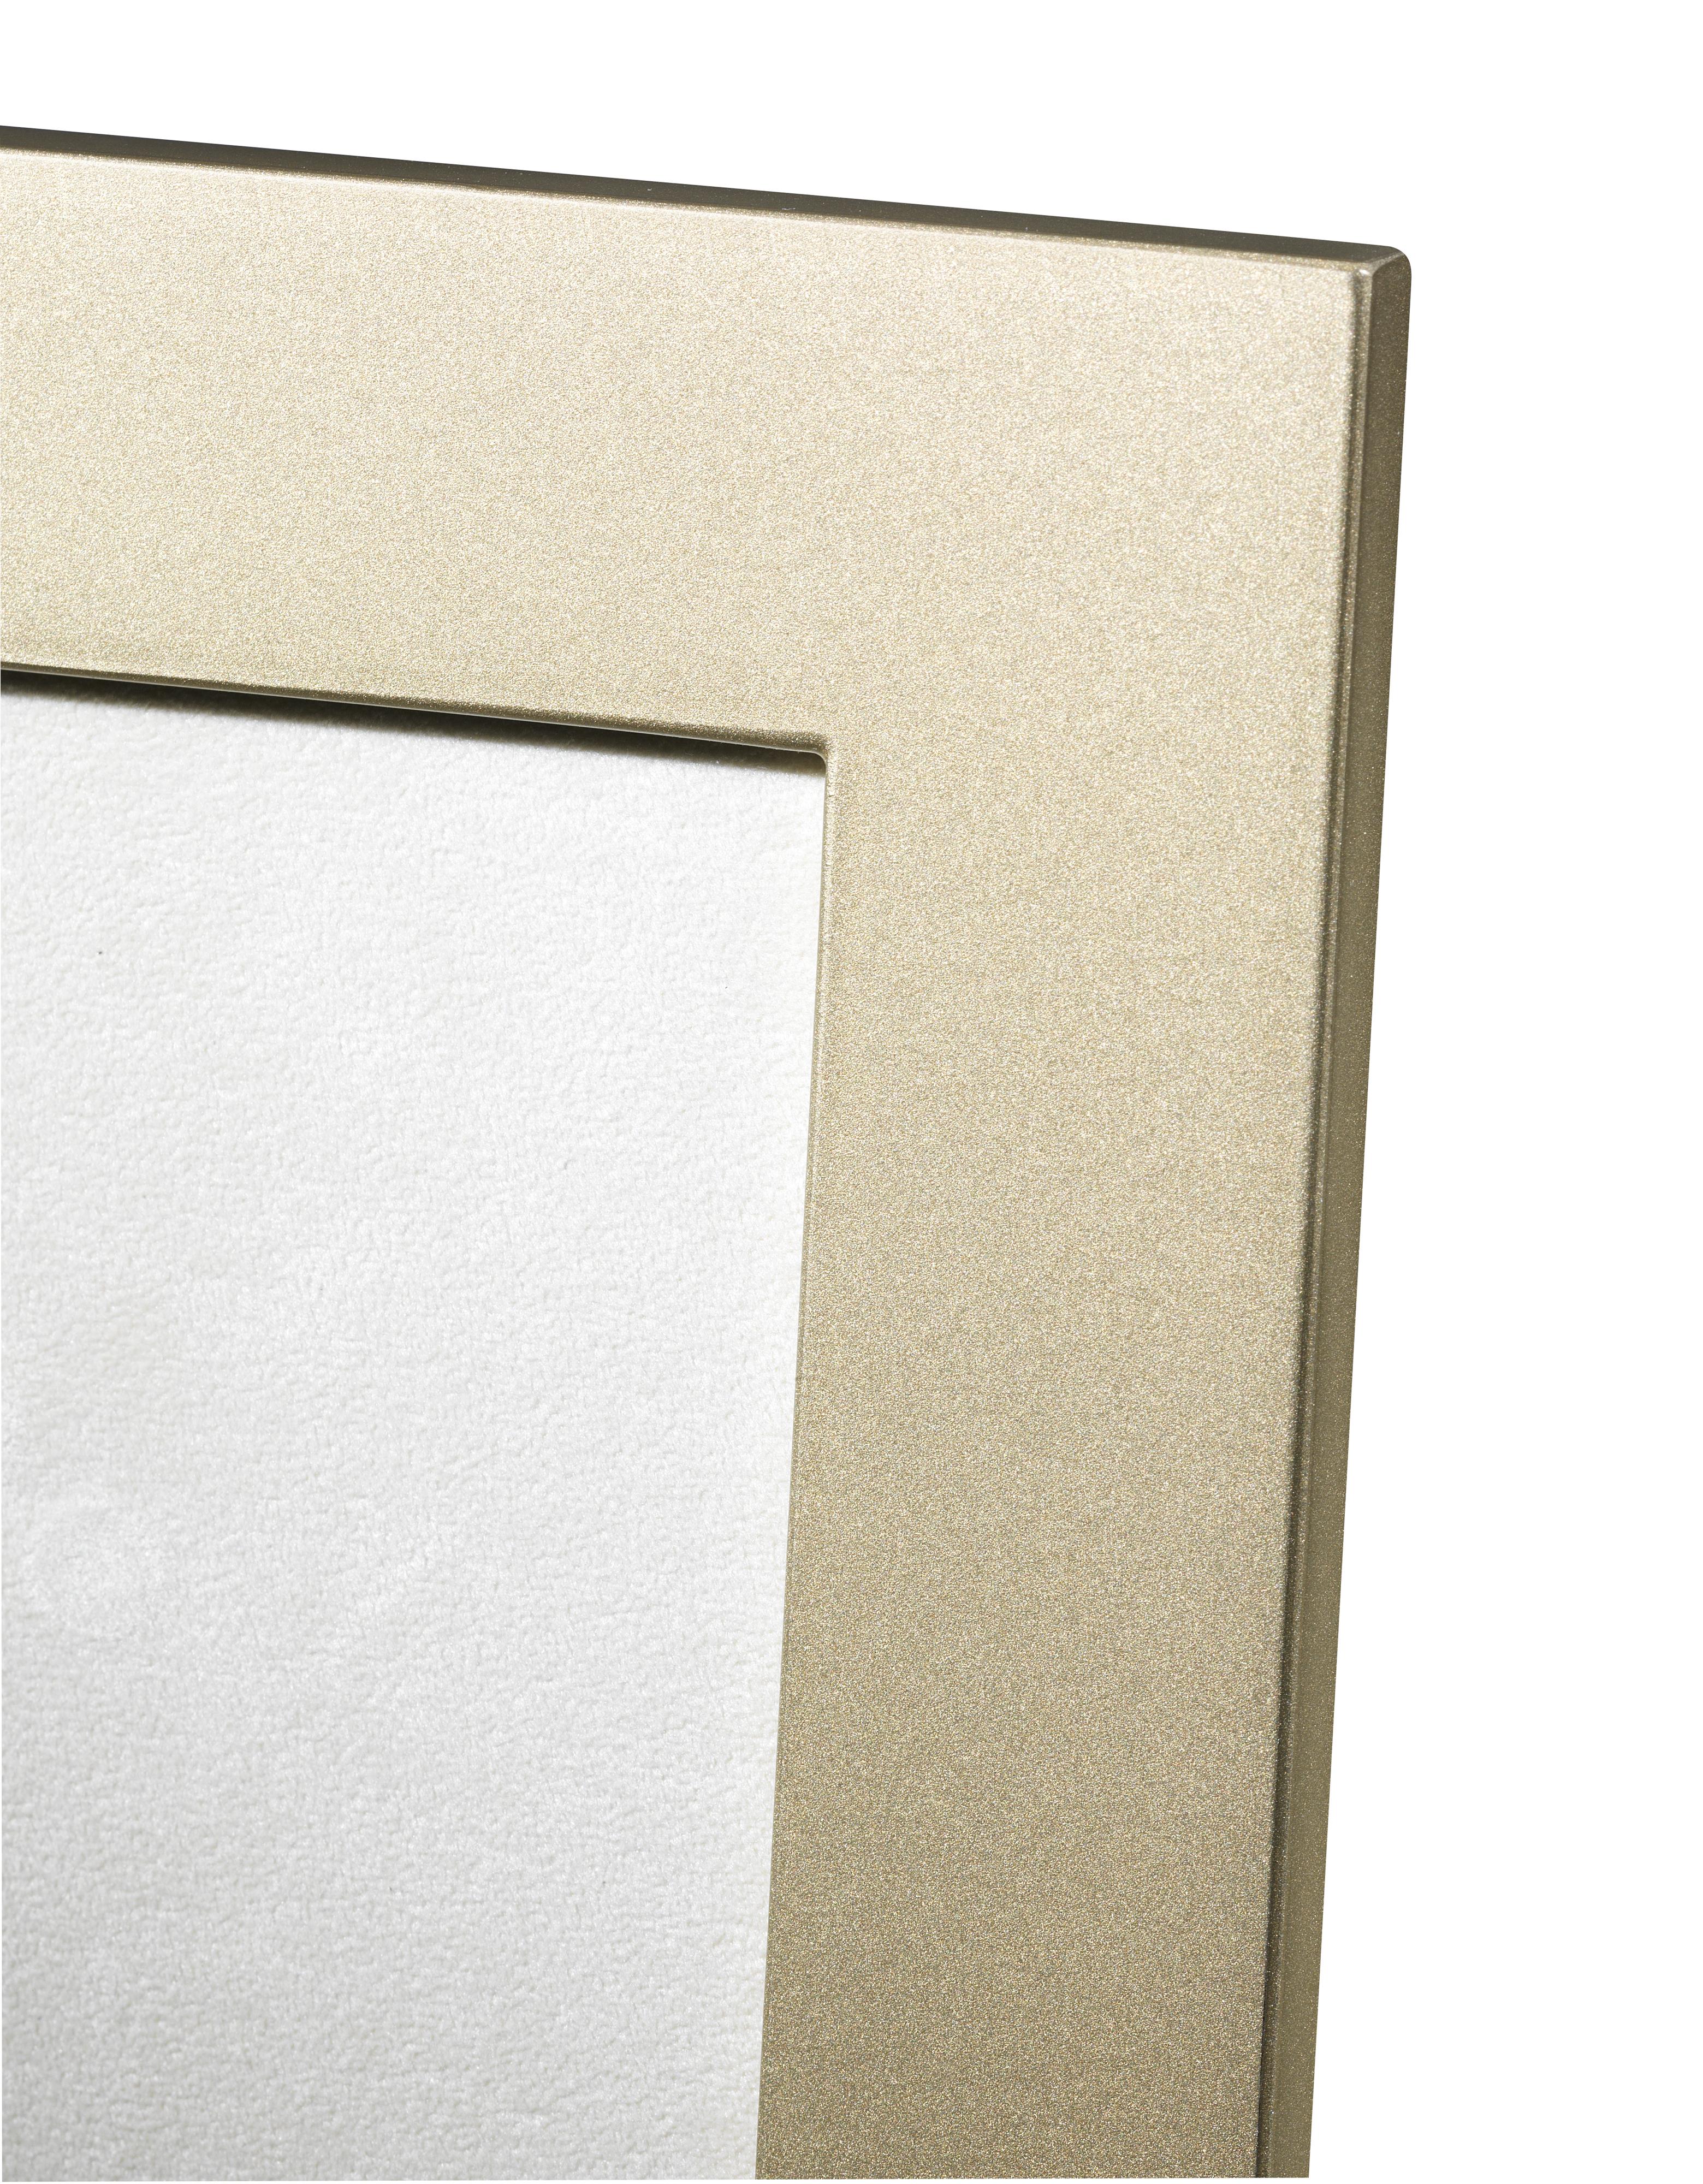 This photo frame is a perfect and original gift idea for a loved one. Entirely handmade in wood, this photo frame features a champagne hue with a brushed and glossy polyester finish that will easily match any decor style.

Show off your favorite